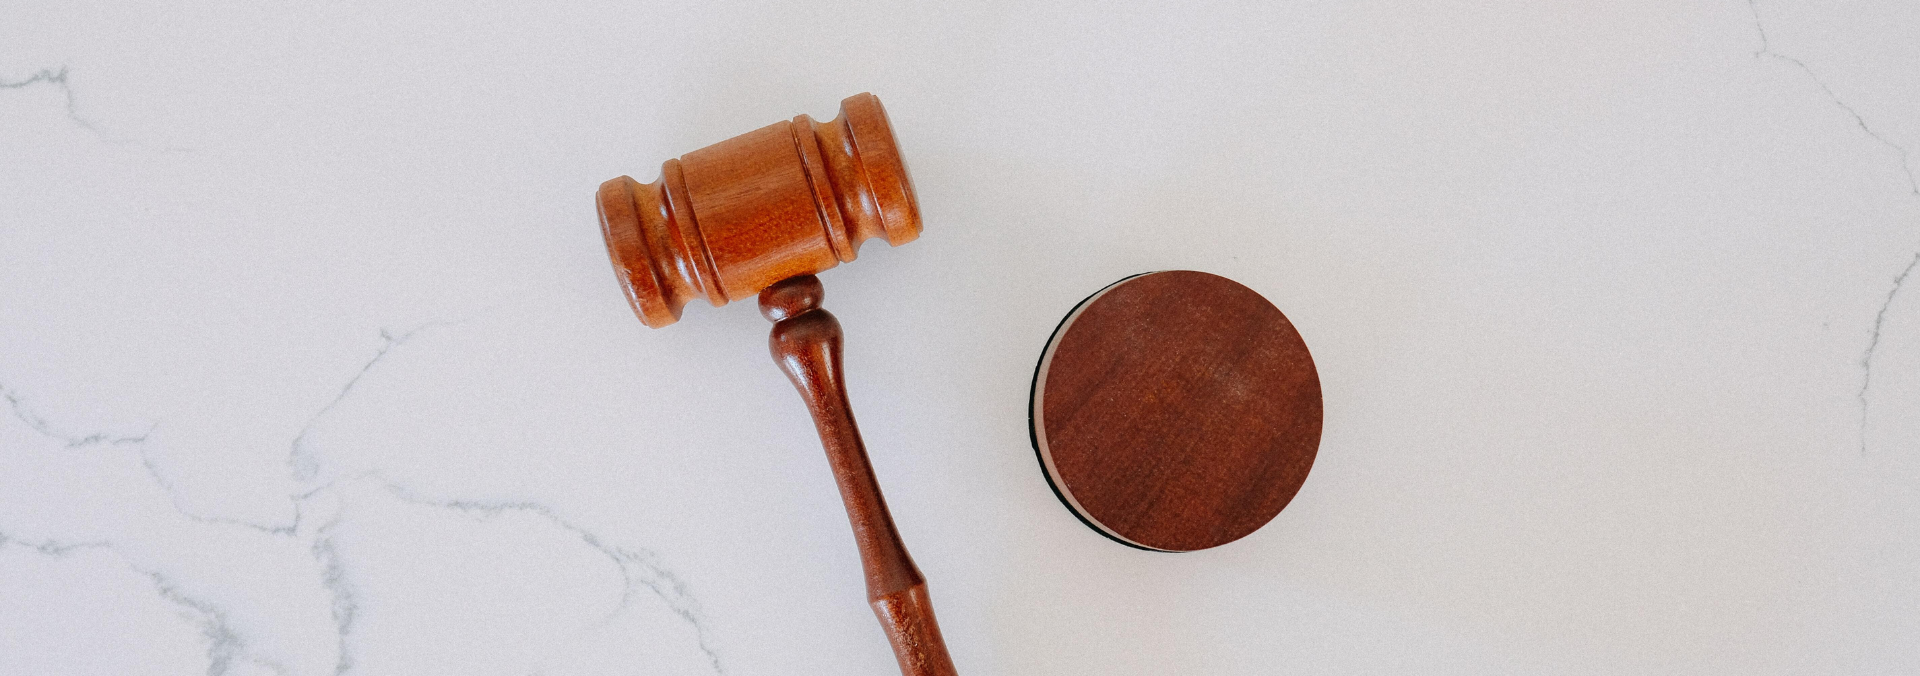 A gavel on a white background